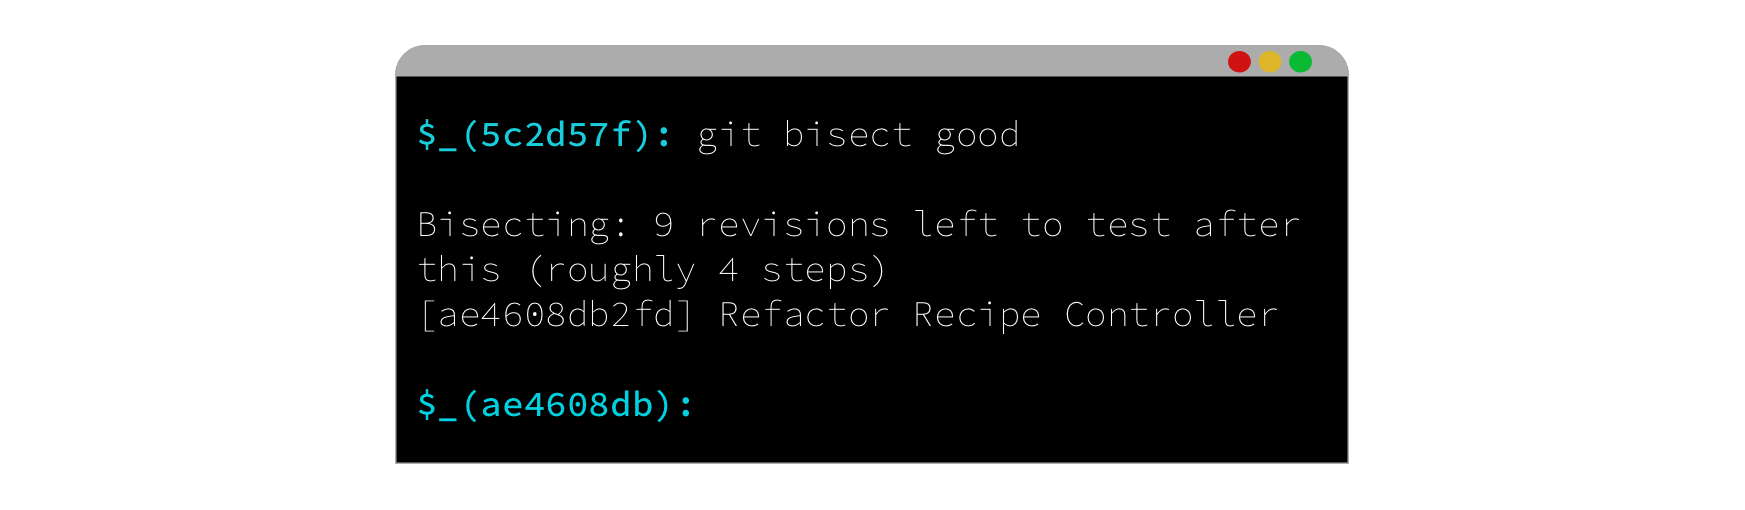 cli_bisect_step.png